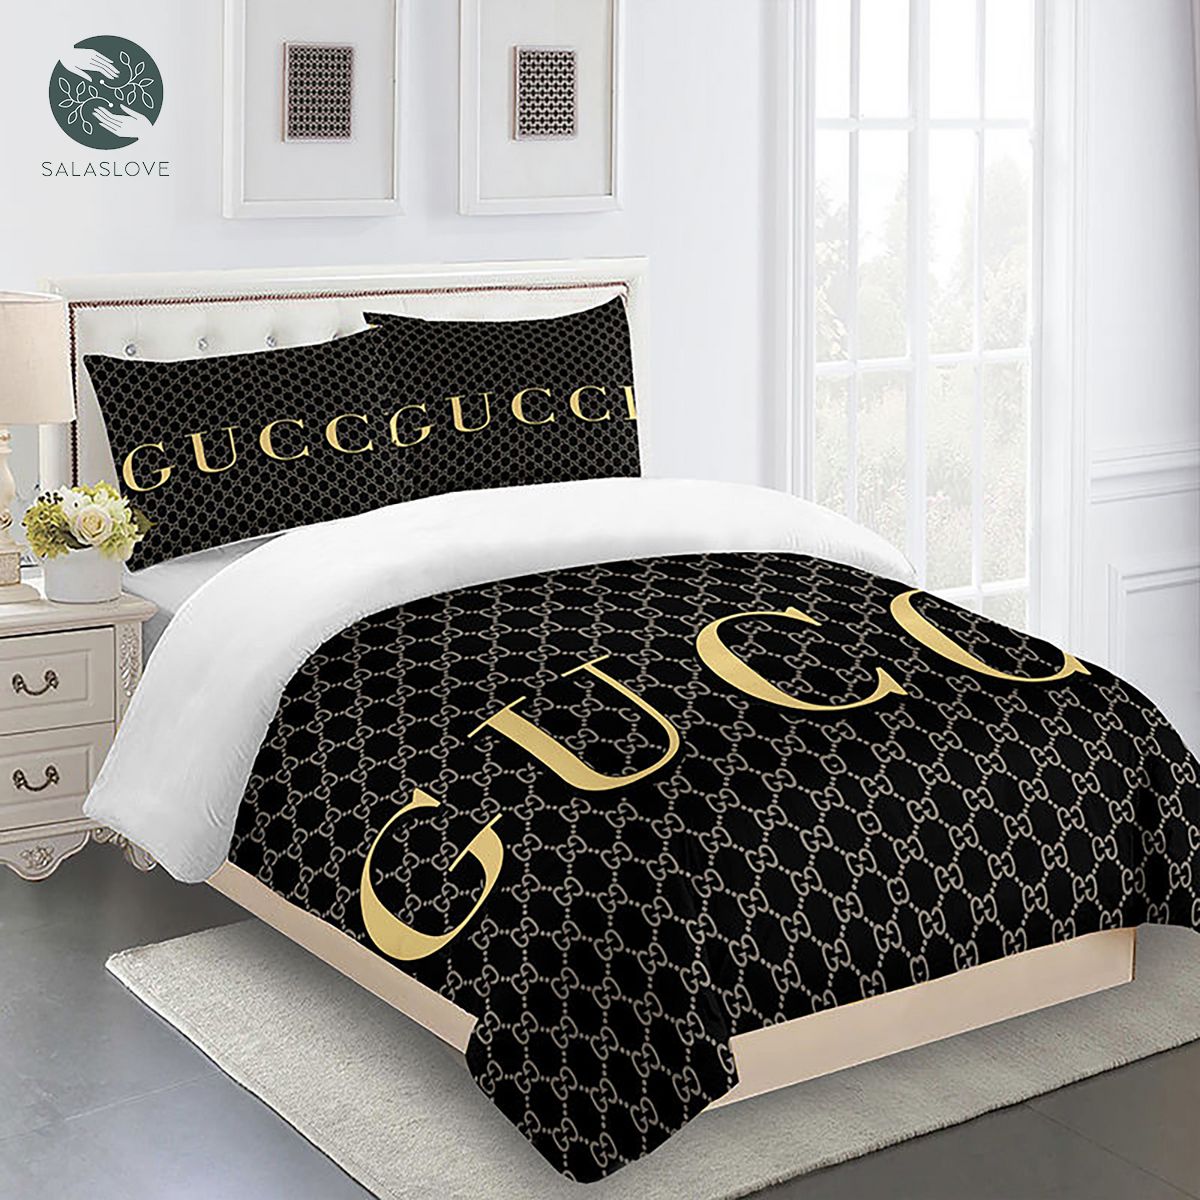 Gucci Bedding Setblack And Gold Luxury Duvet Cover Bedding Sets